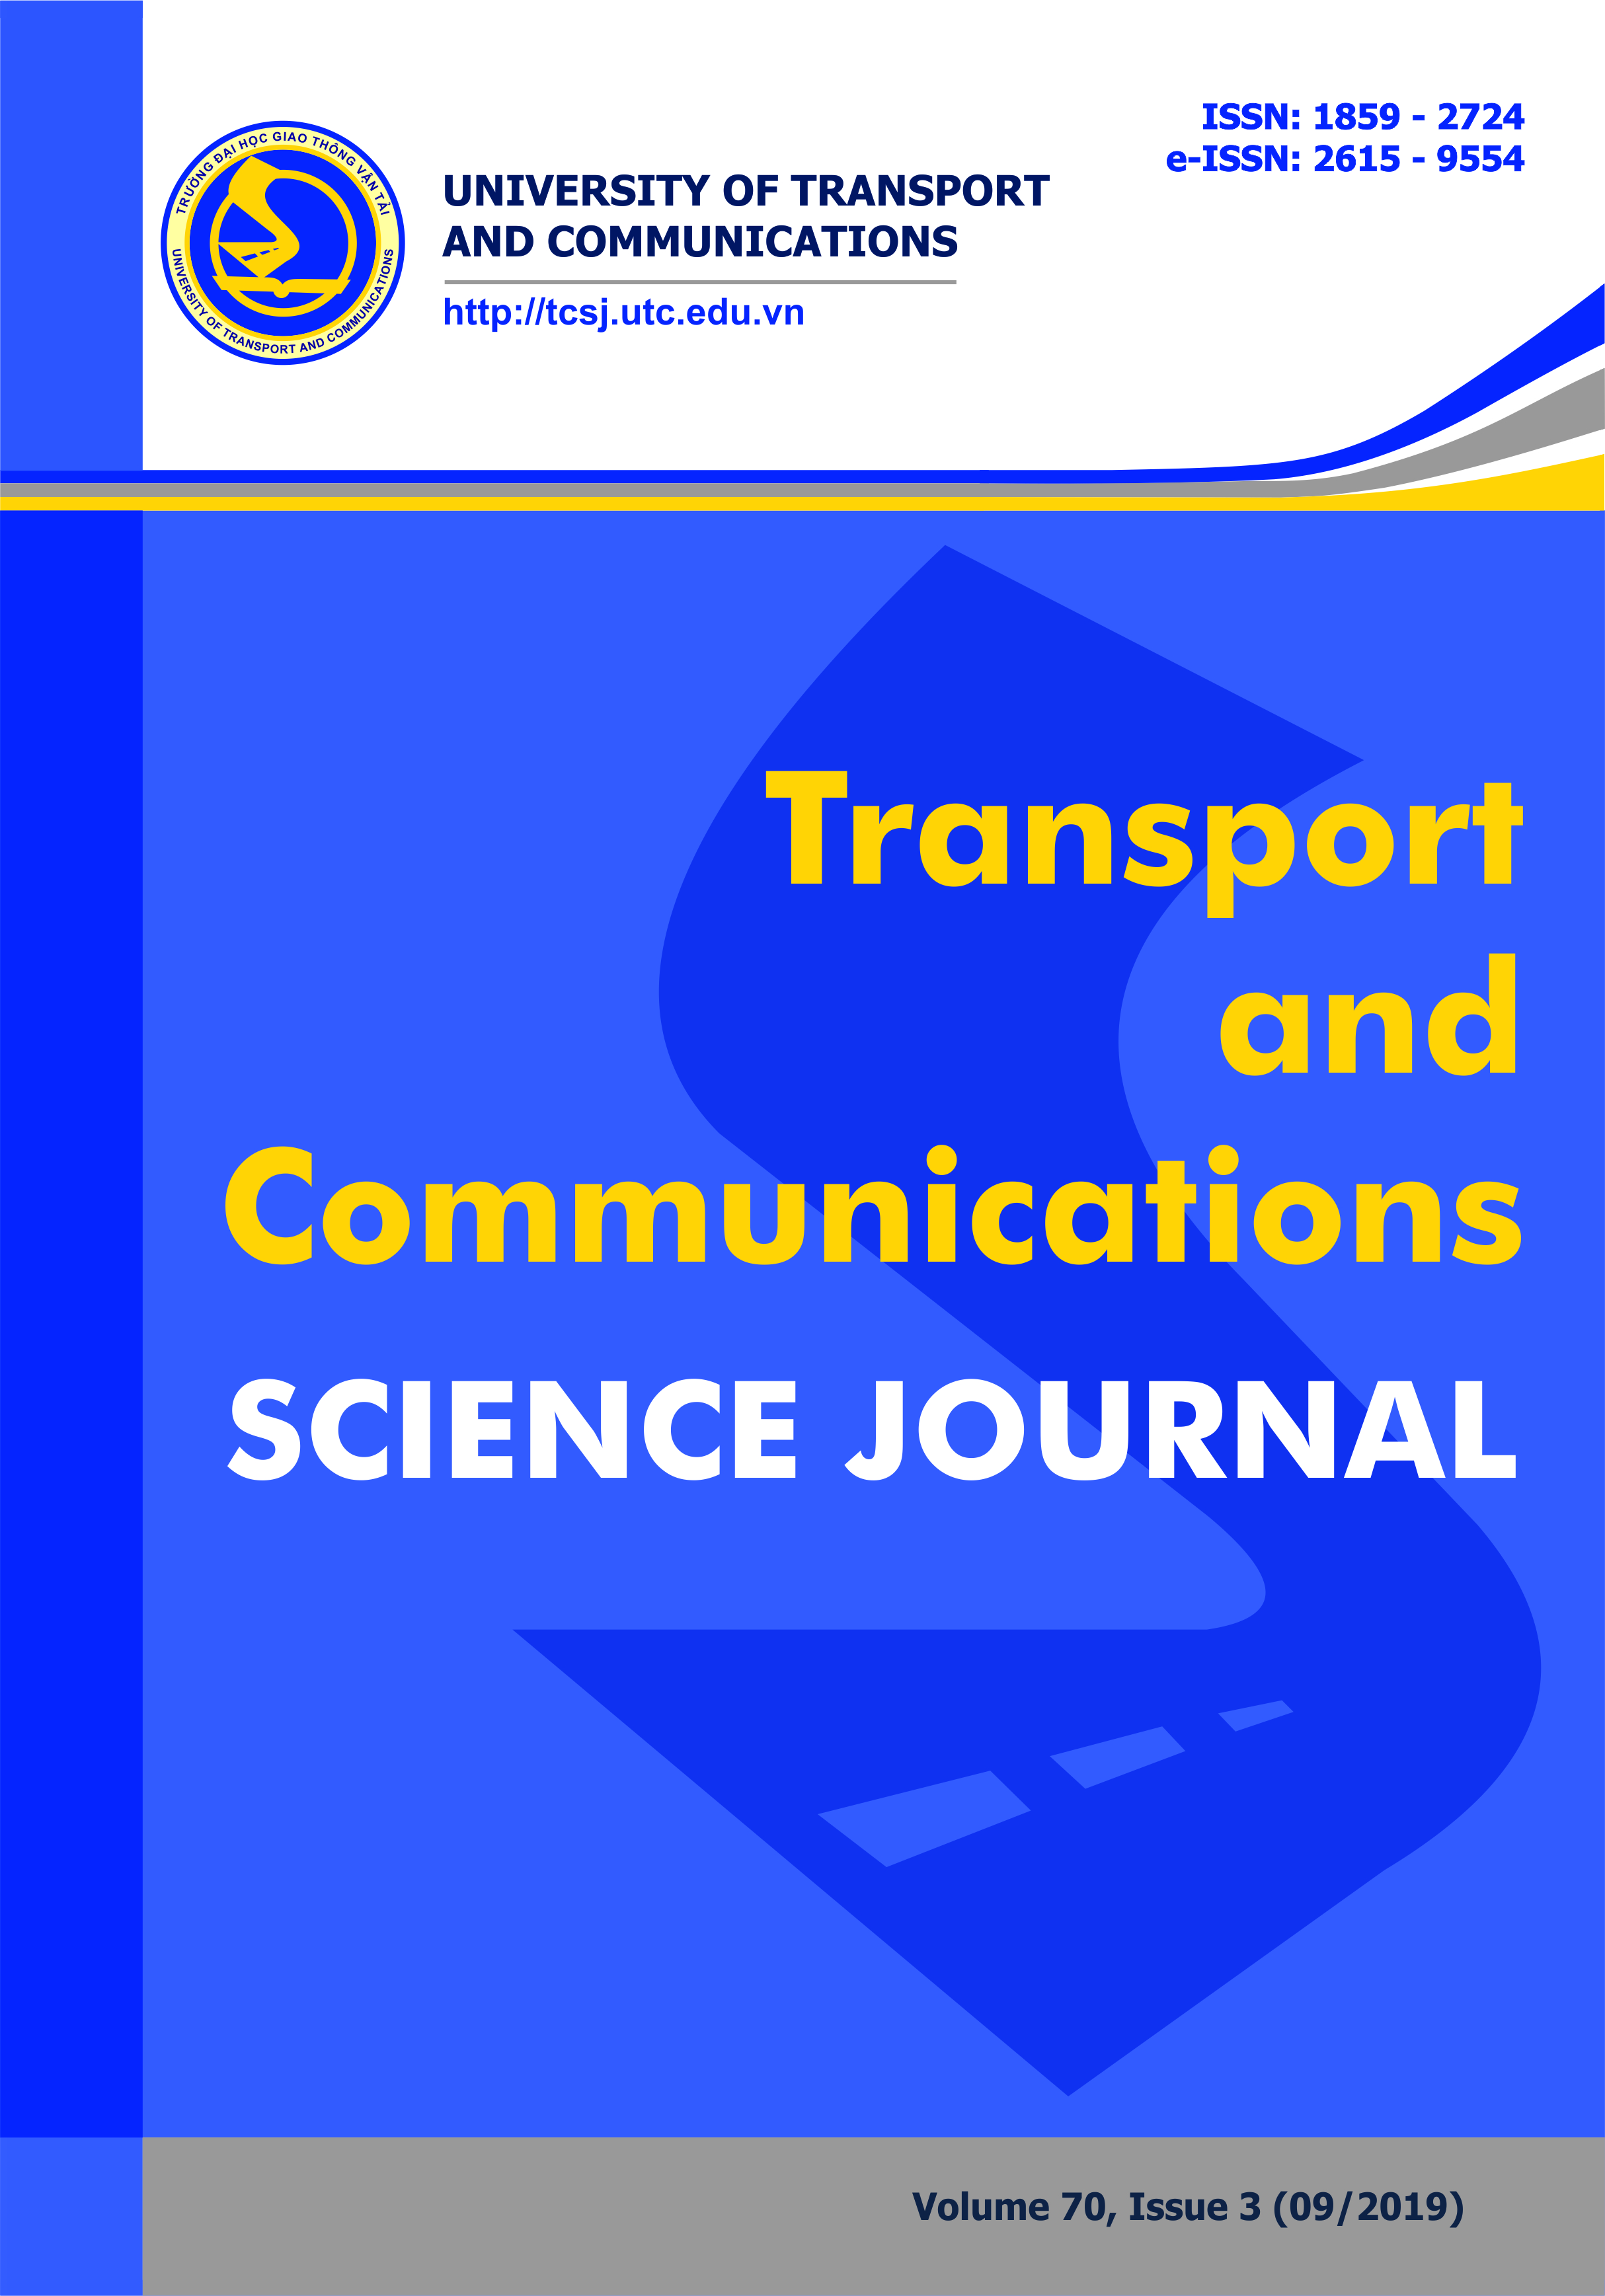 Multiple vehicles detection and tracking for intelligent transport systems using machine learning approaches